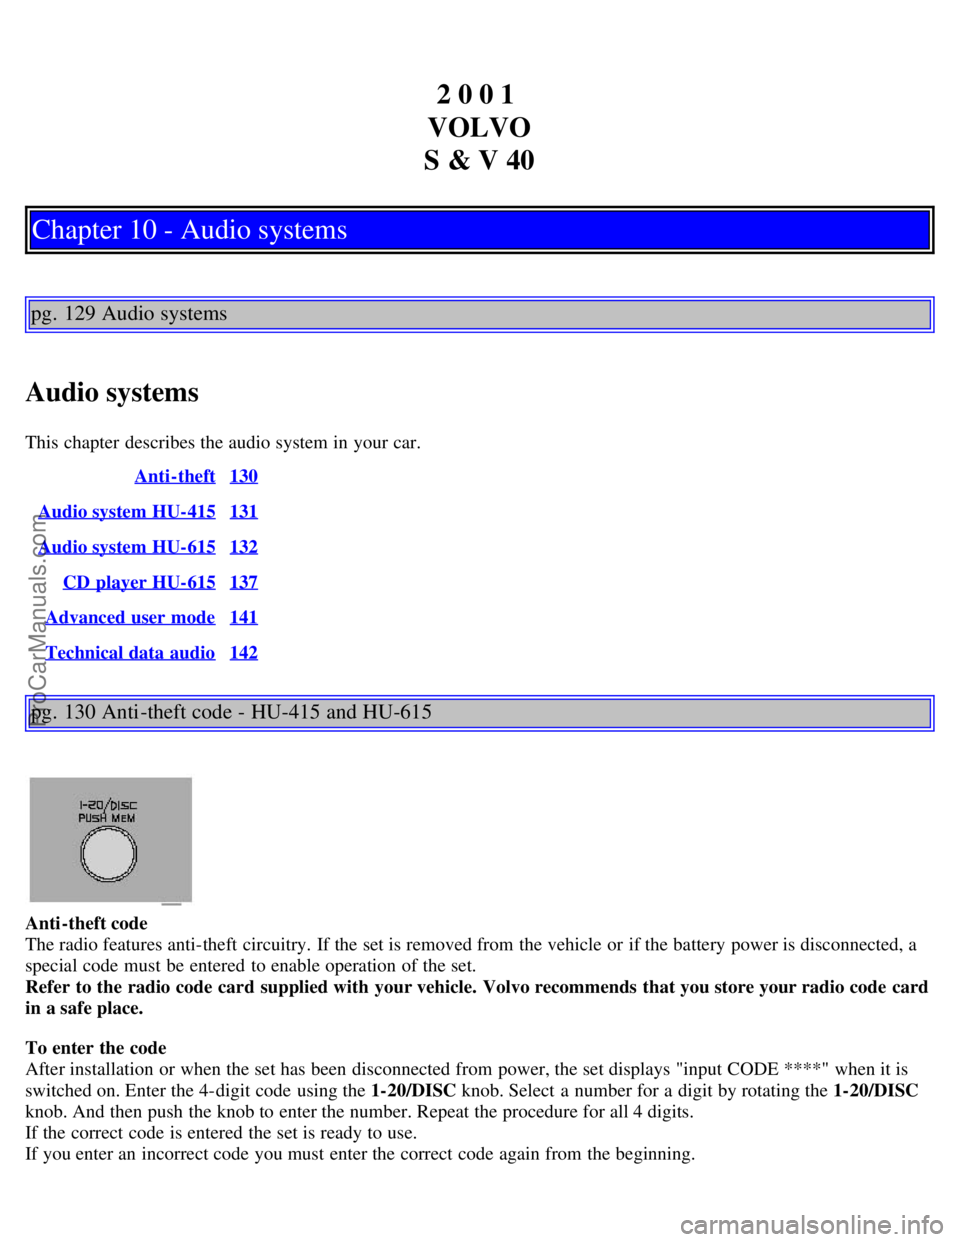 VOLVO V4 2001  Owners Manual 2 0 0 1 
VOLVO
S & V 40
Chapter 10 - Audio systems
pg. 129 Audio systems
Audio systems
This chapter  describes the audio system in your car.  Anti-theft
130
Audio system HU-415131
Audio system HU-6151